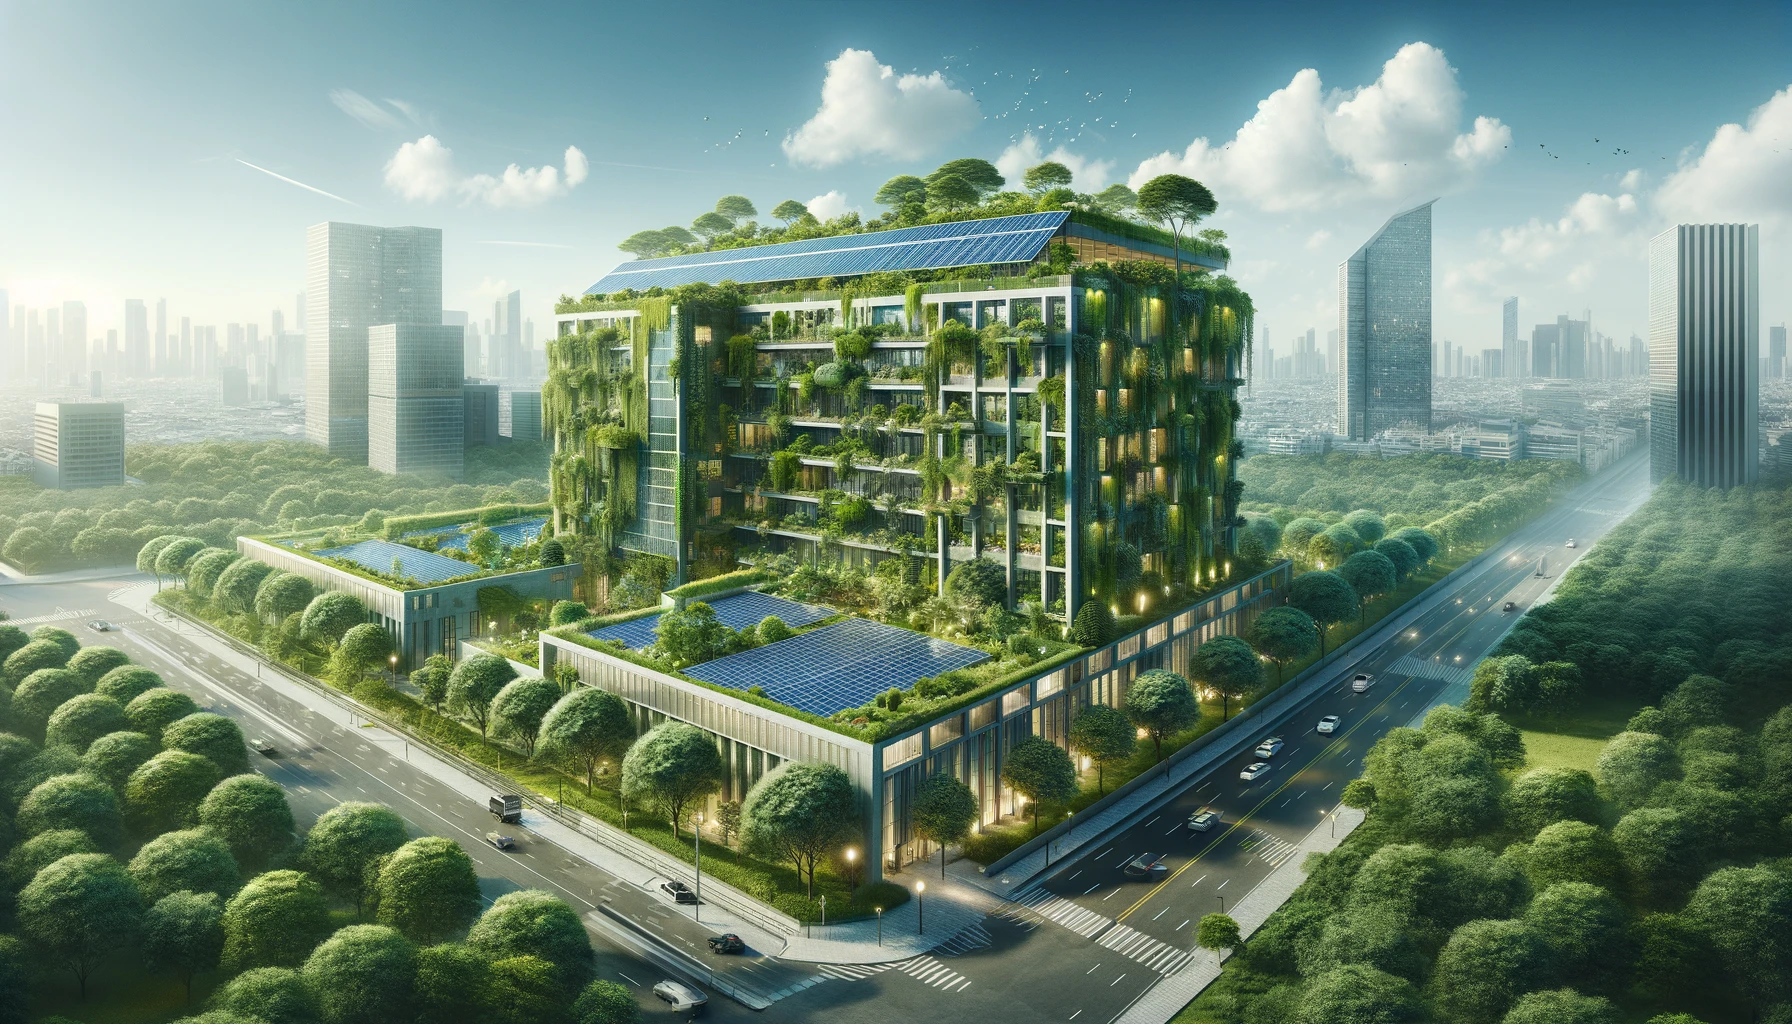 Sustainable Real Estate